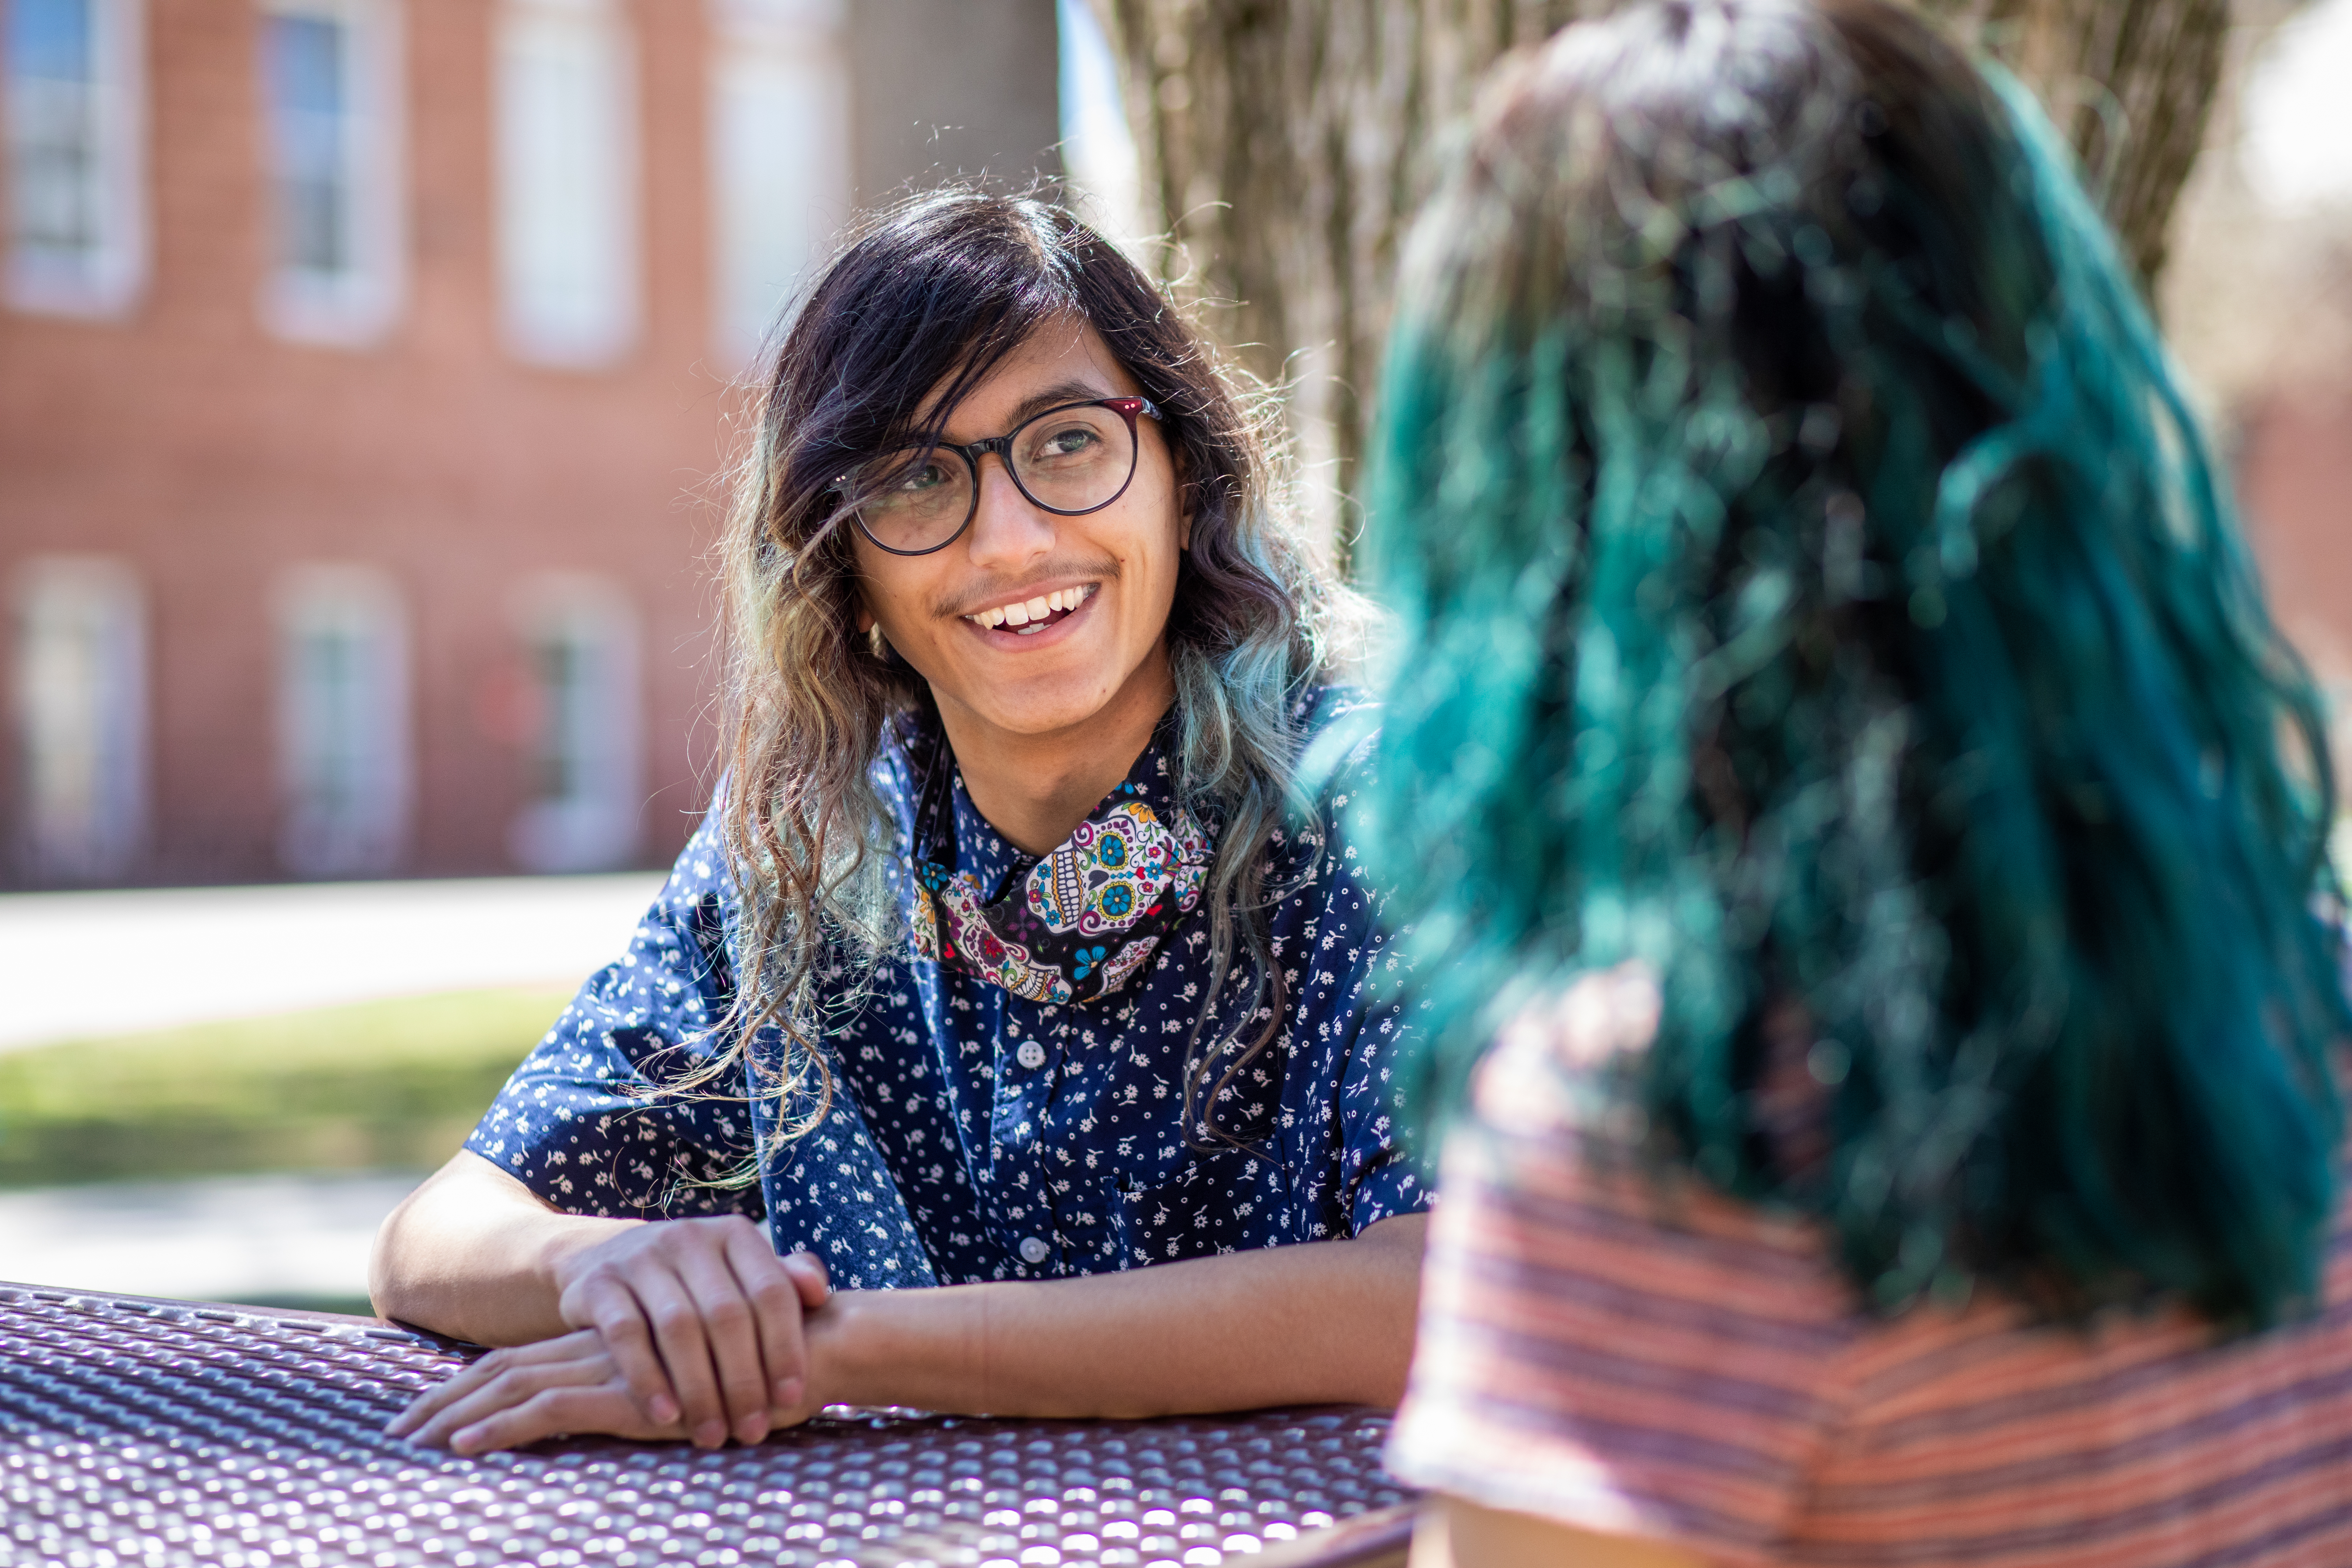 A photo of a student sitting outside and smiling.